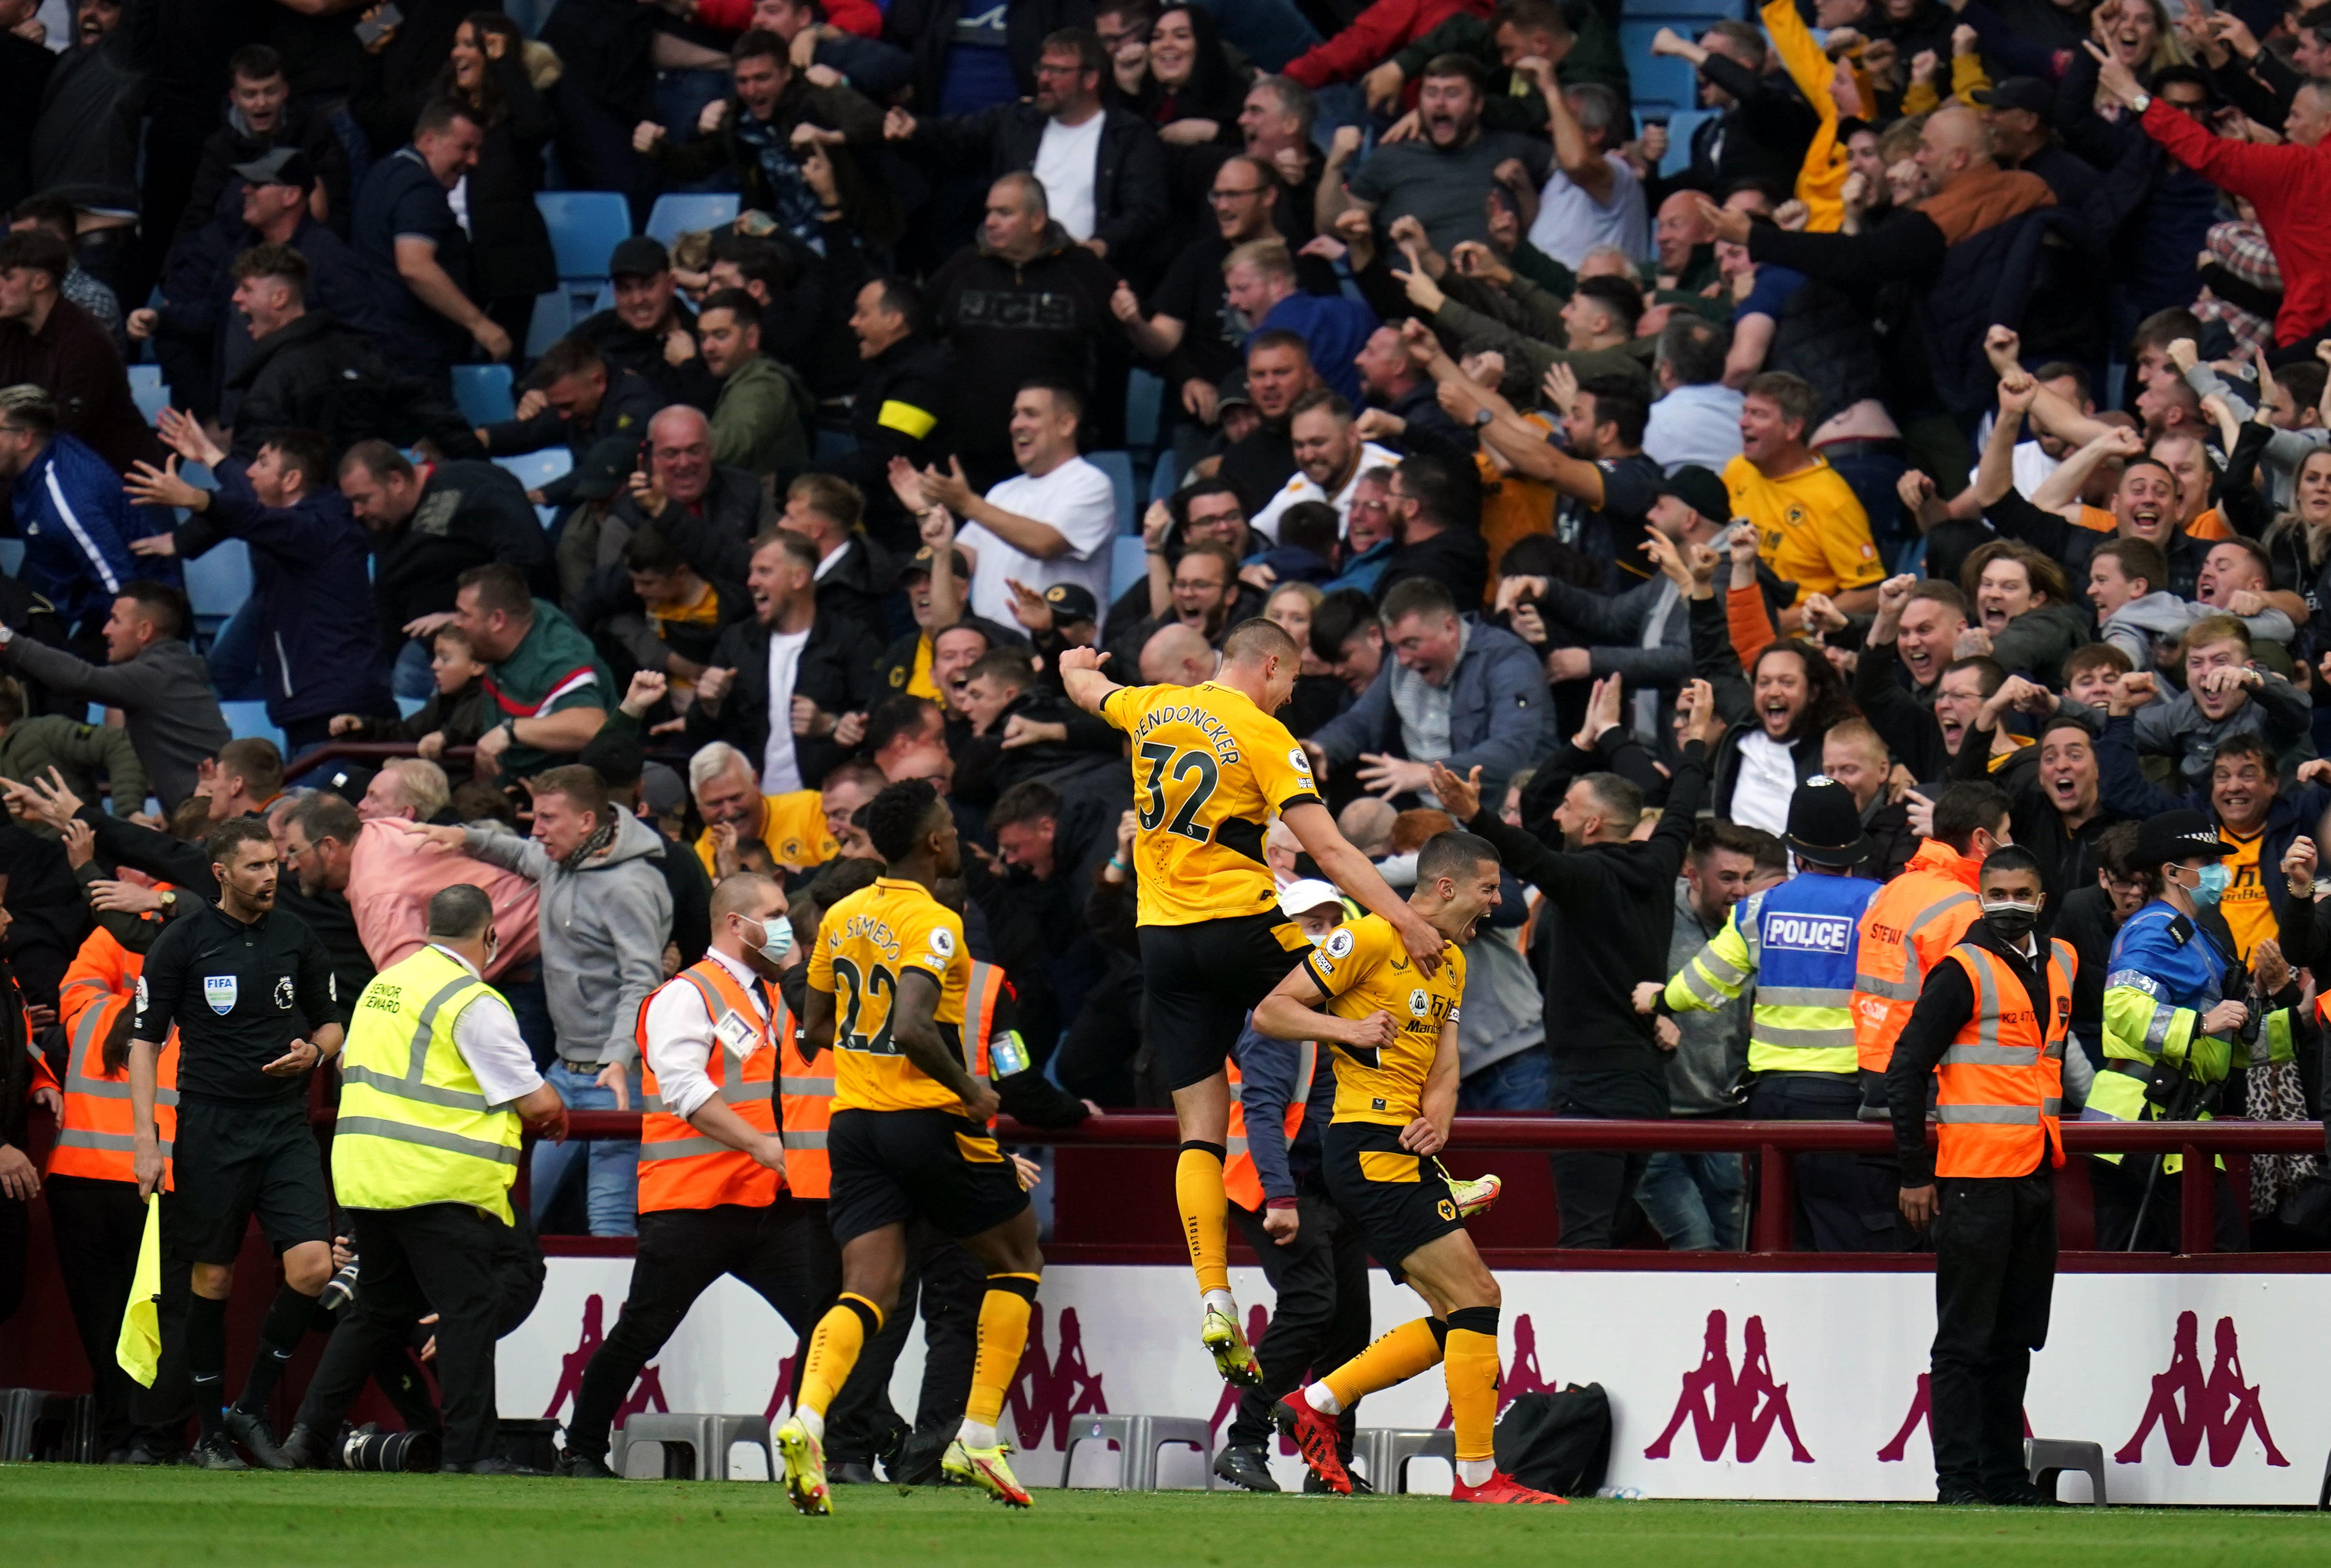 Aston Villa vs Wolves result Visitors stage stunning fightback to win with three late goals The Independent